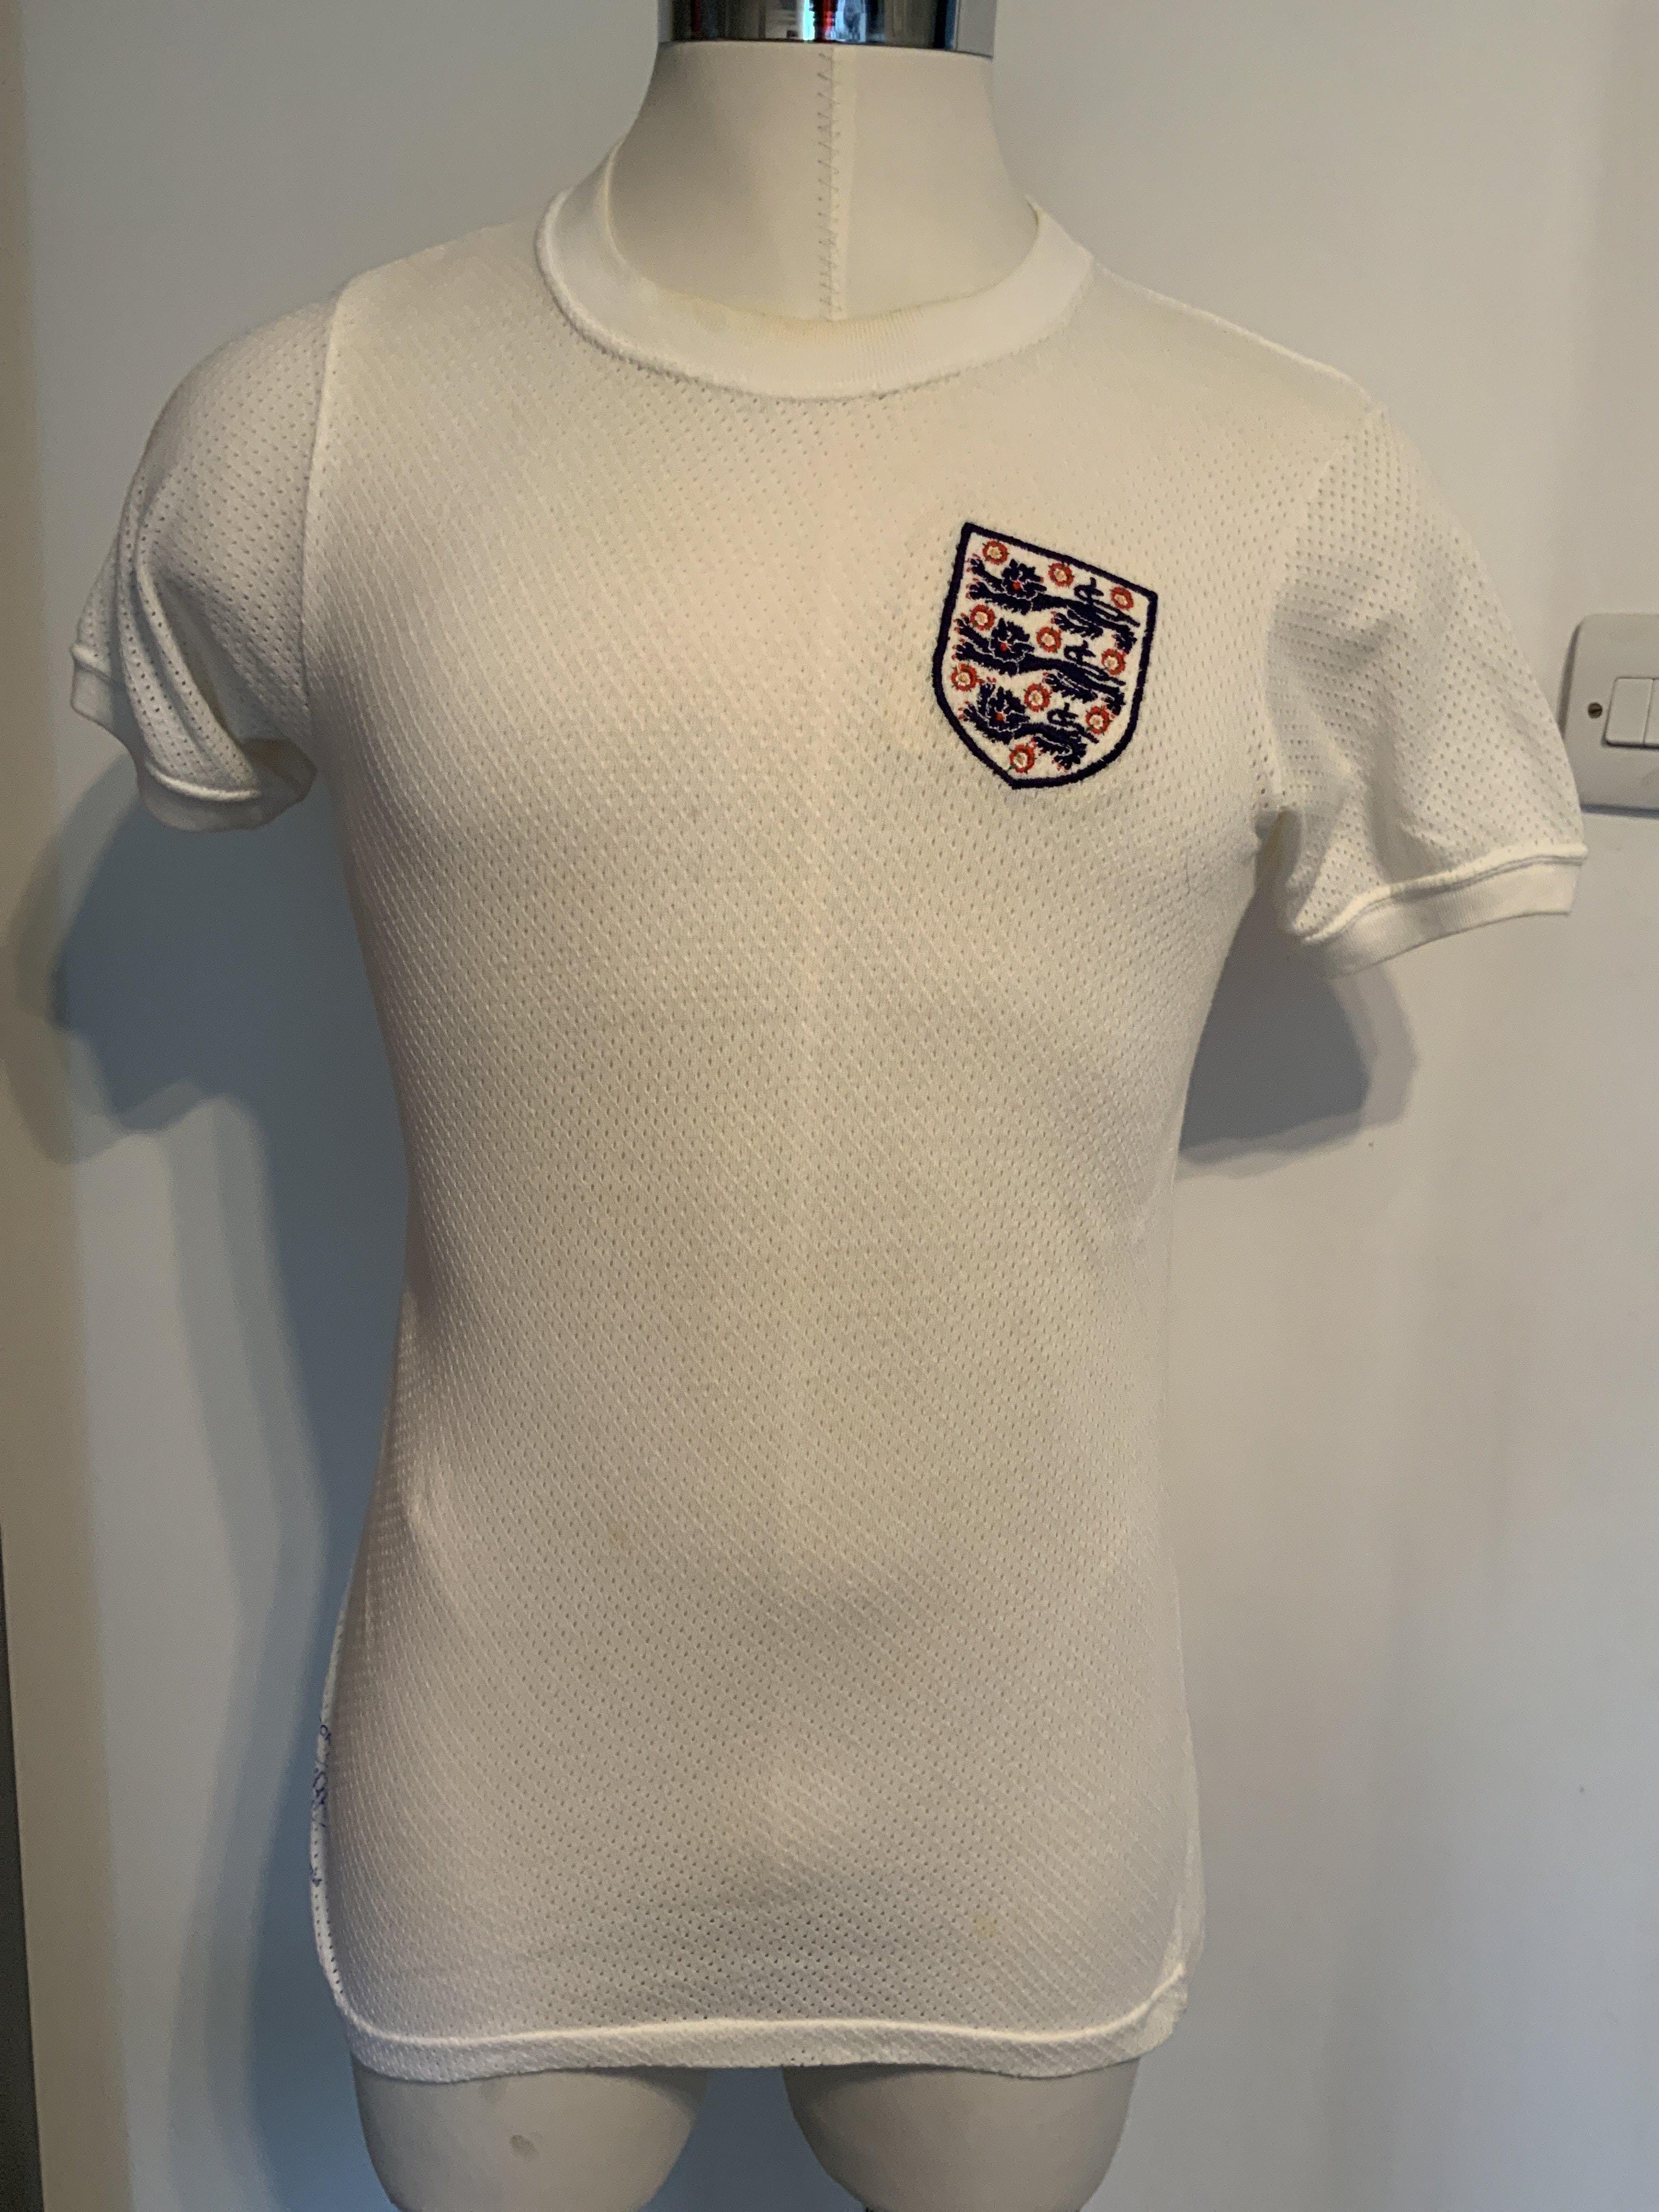 Nobby Stiles 1970 England World Cup Match Issued F